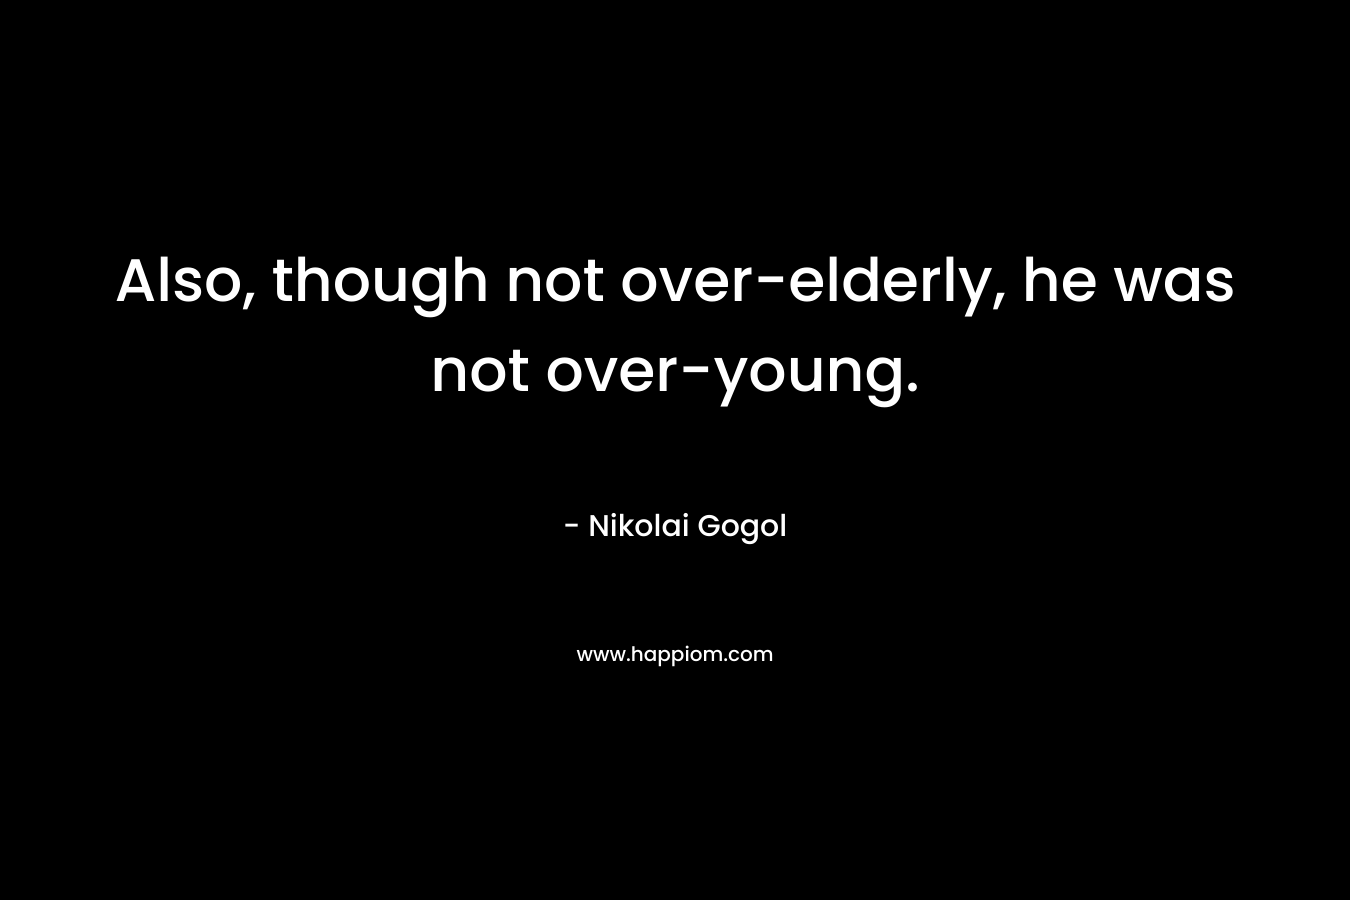 Also, though not over-elderly, he was not over-young.